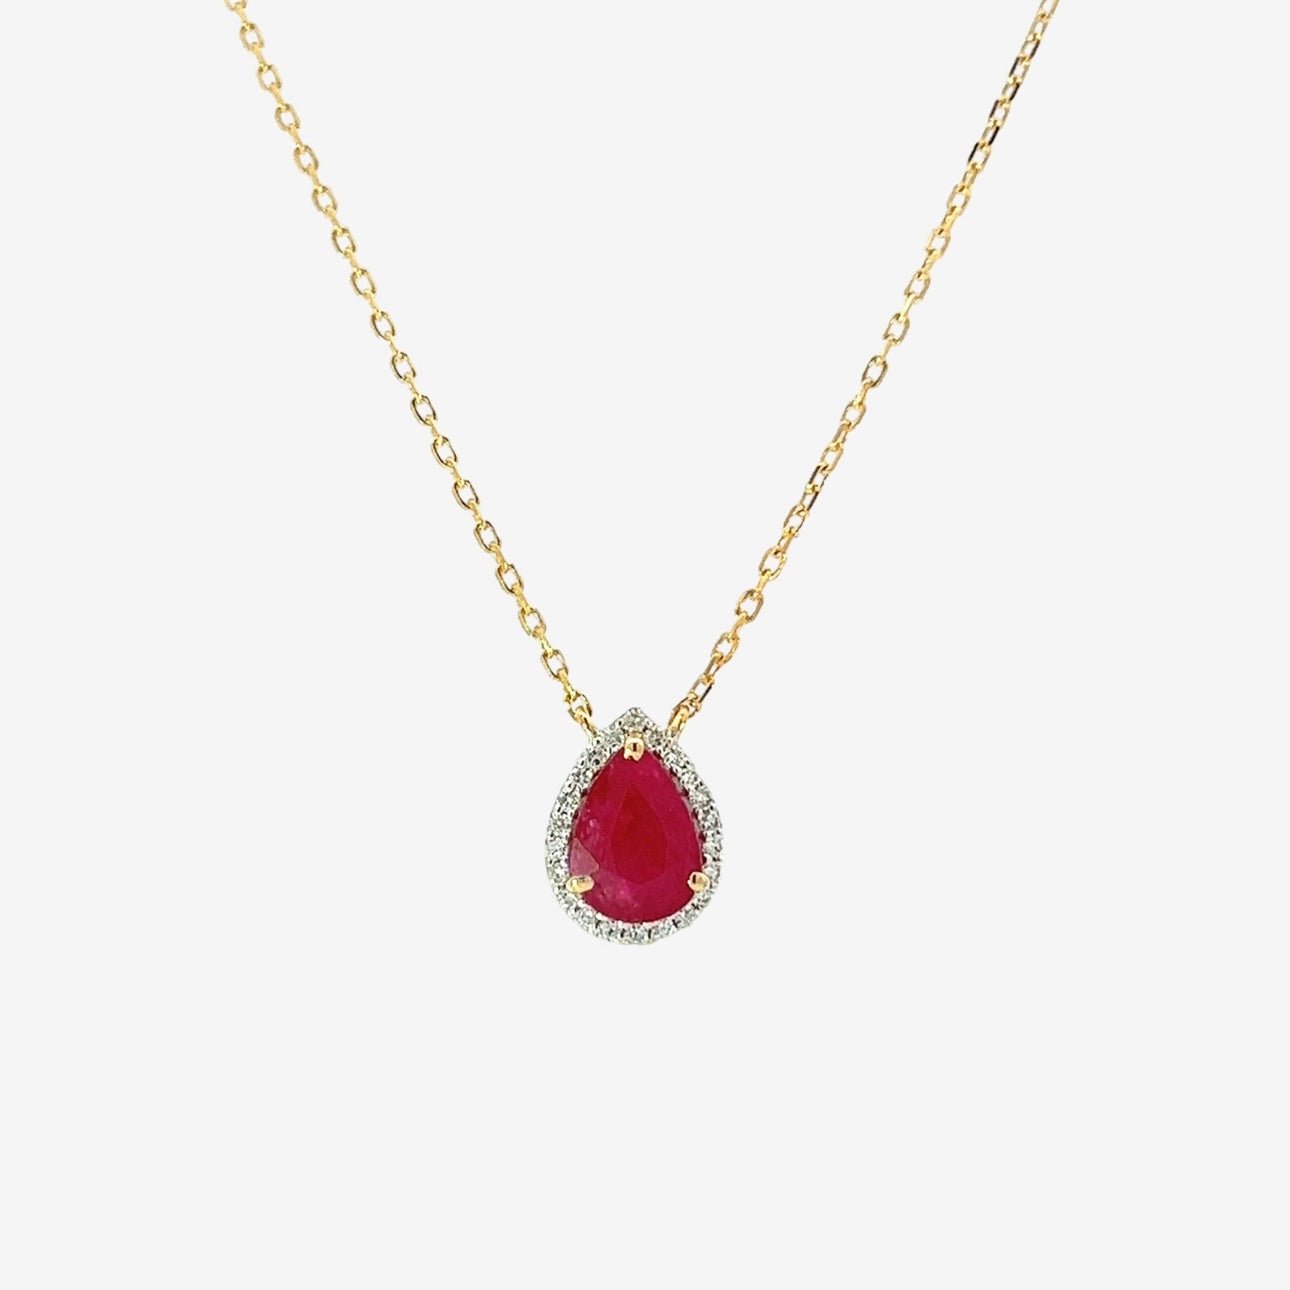 Garda Necklace in Diamond and Ruby - 18k Gold - Lynor